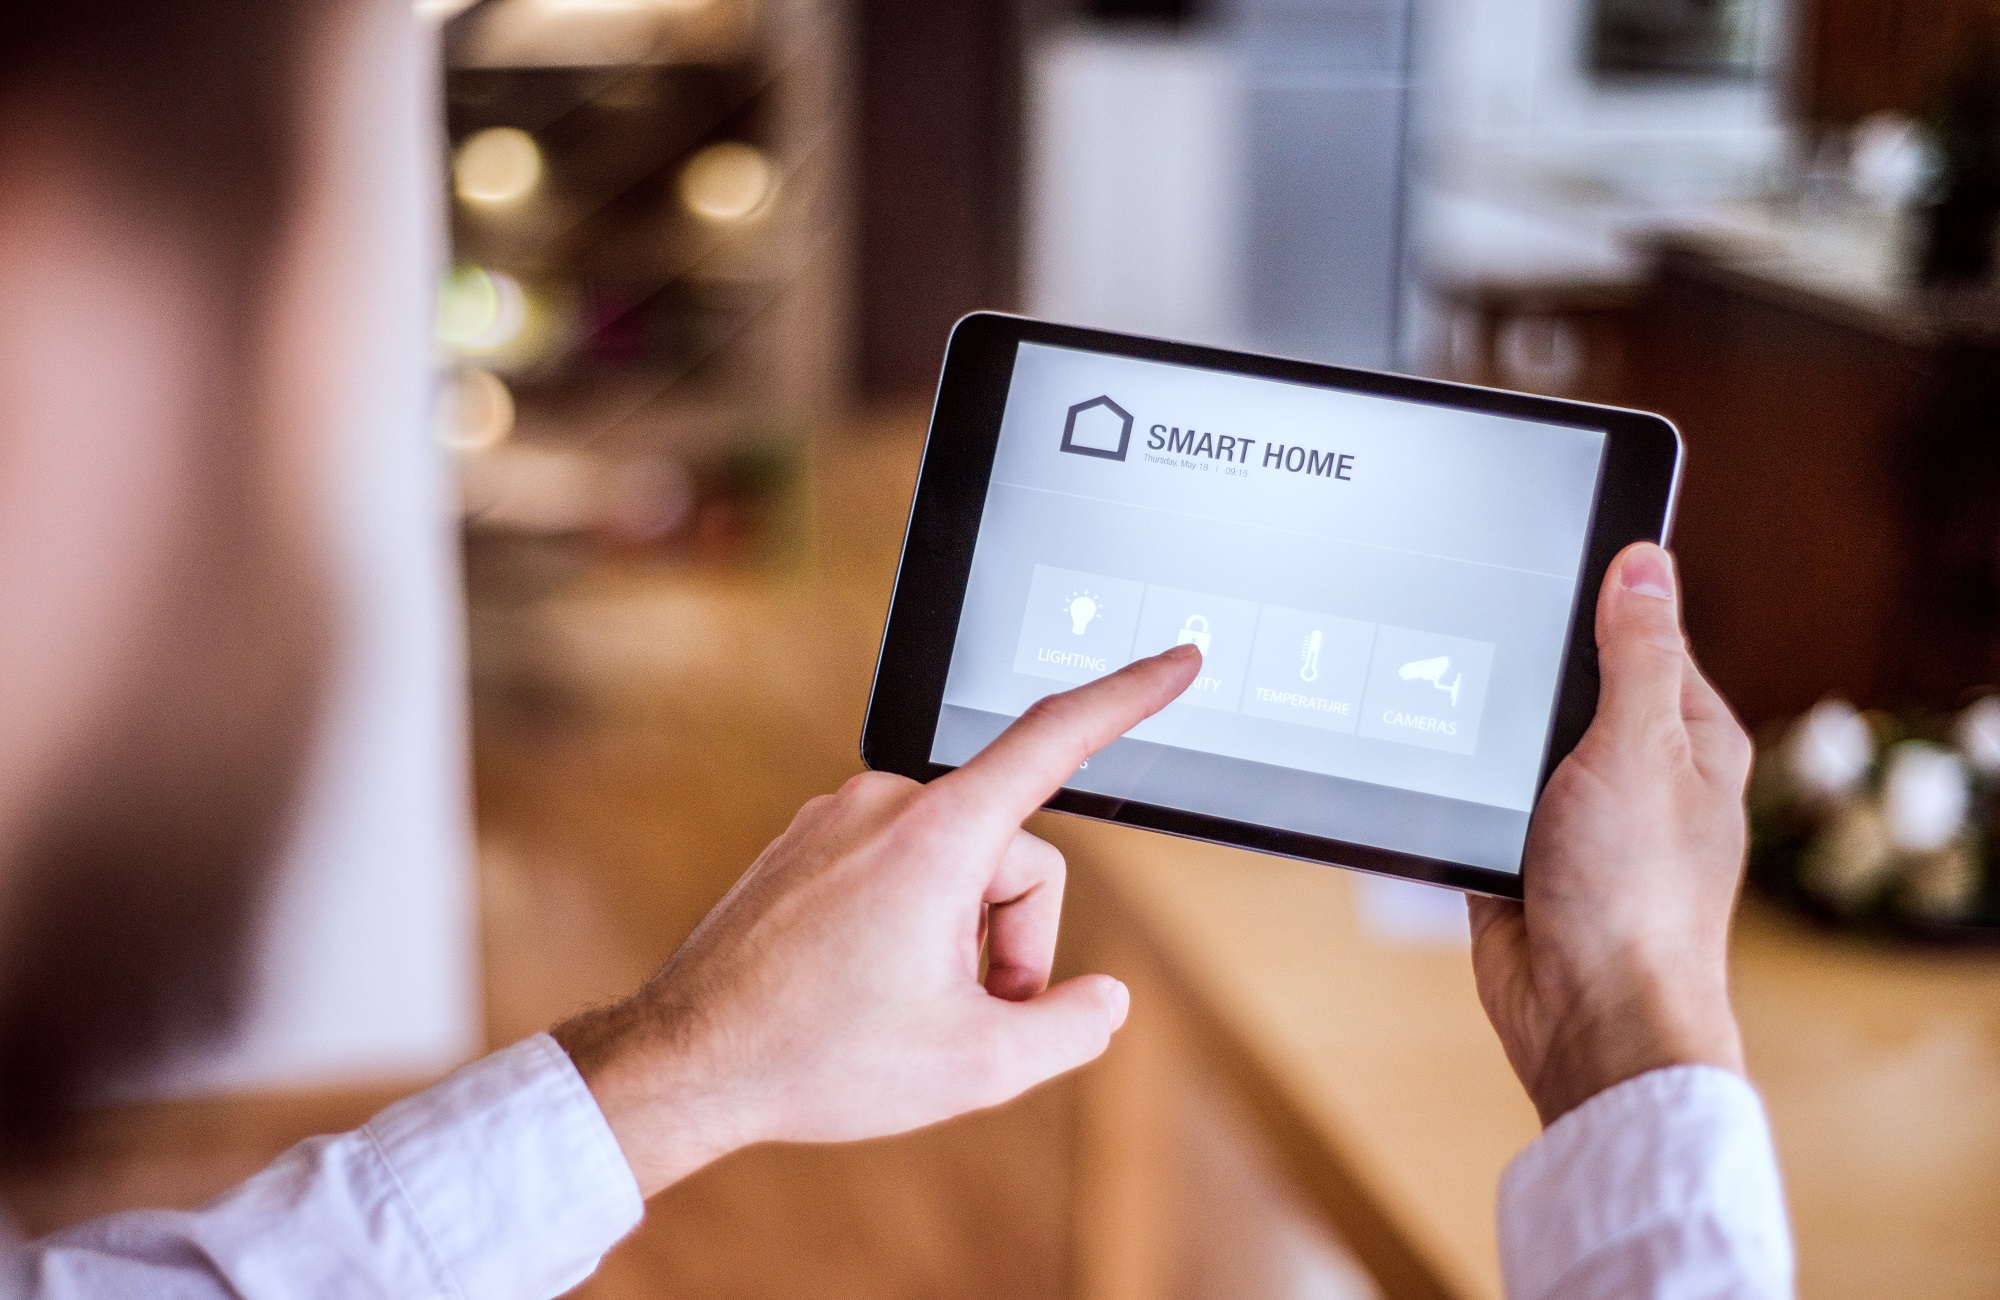 A tablet with smart home control system.